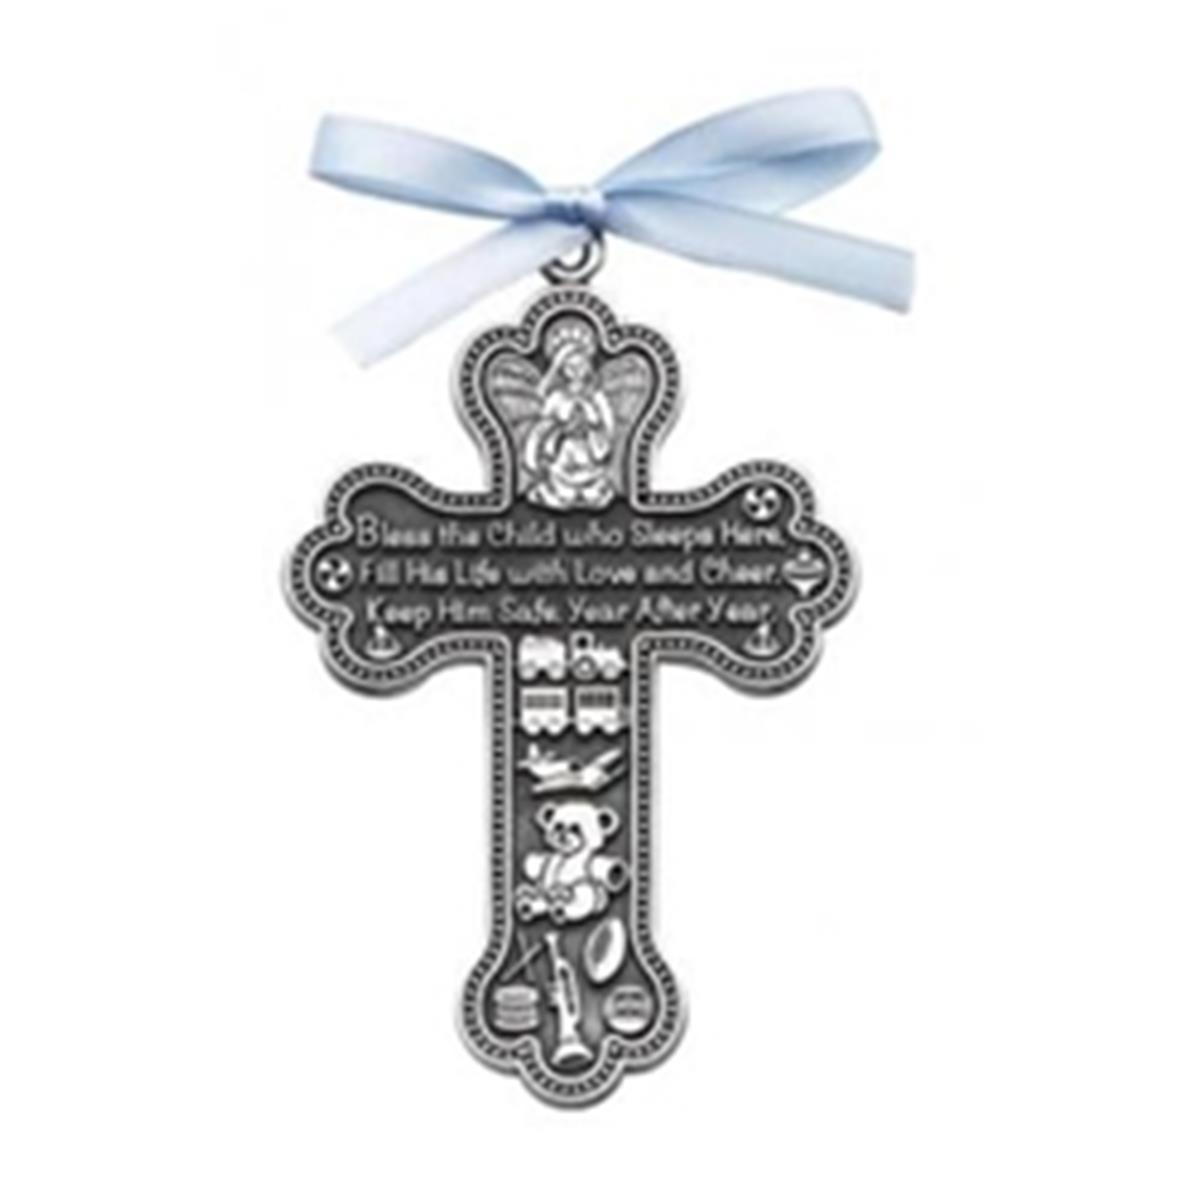 Ca Gift 14176x Crib Cross-bless This Child With Blue Ribbon, Pewter - Gift Boxed